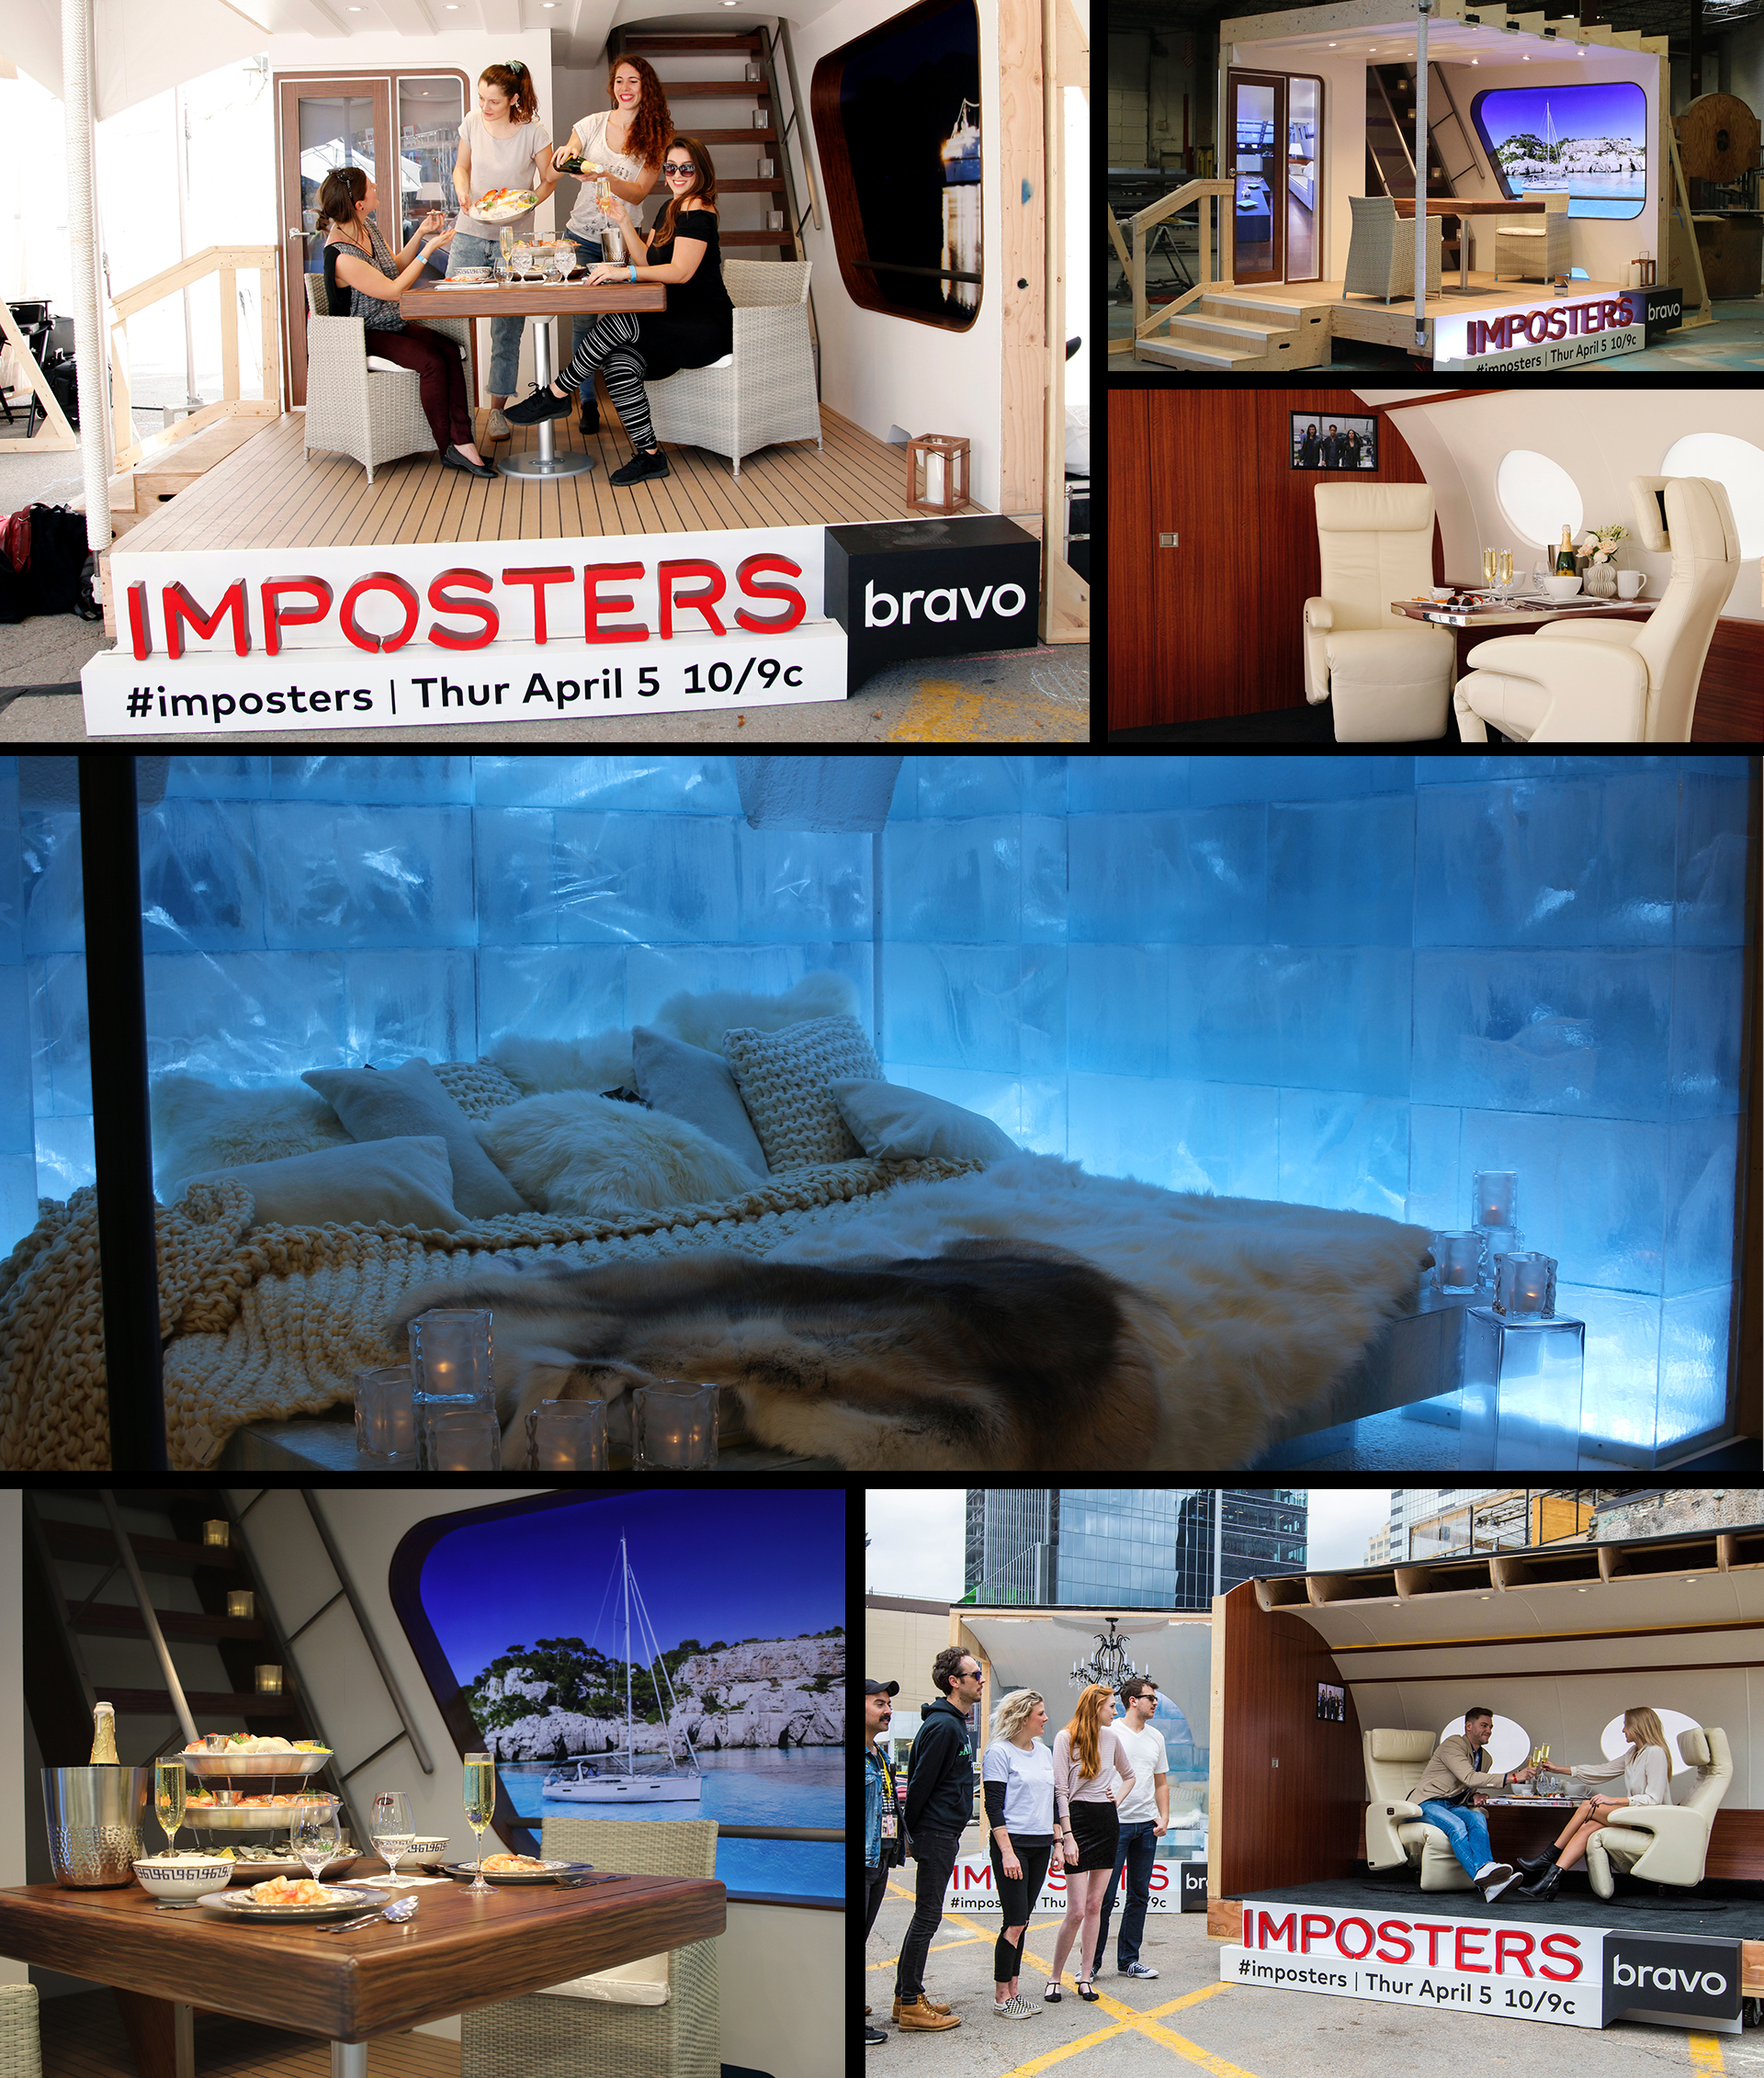 Marketing Activation Fabrication for SXSW - Bravo Imposters